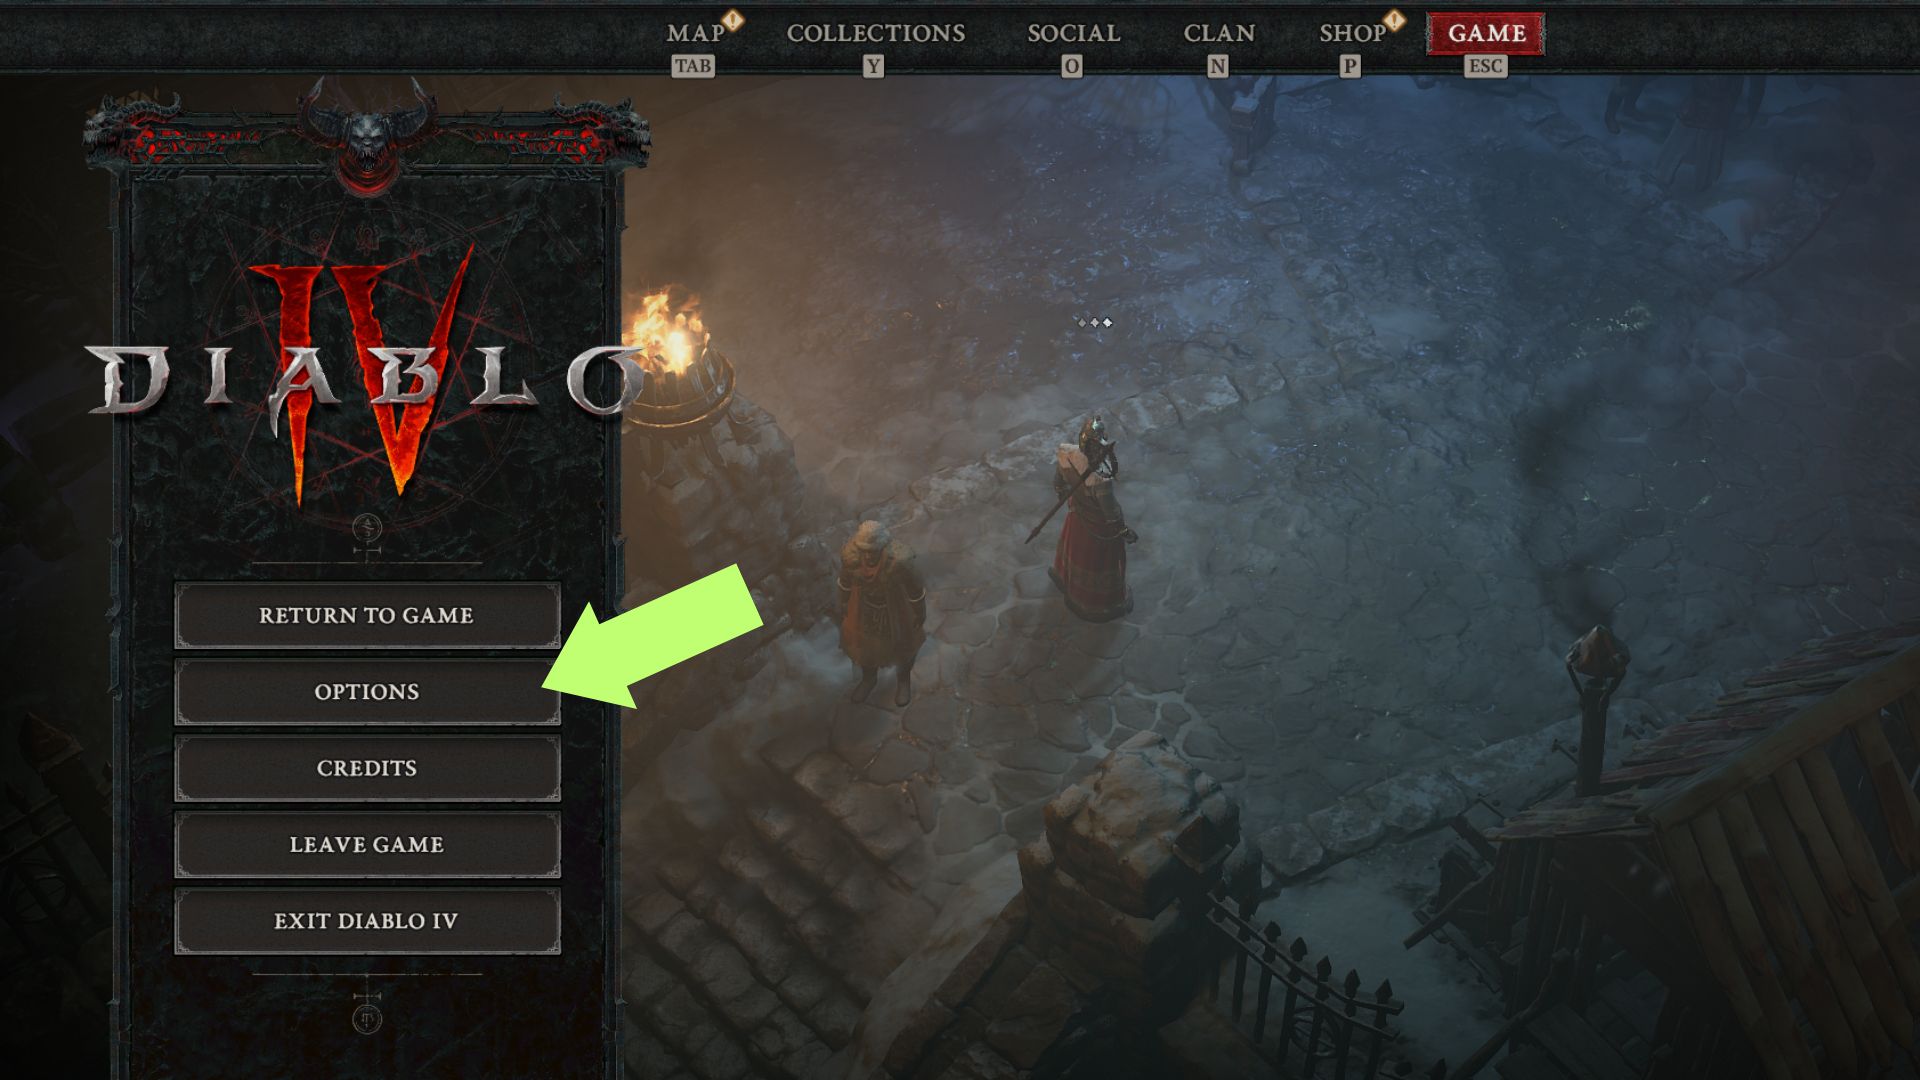 A screenshot showing the Options section on the Diablo 4 main screen